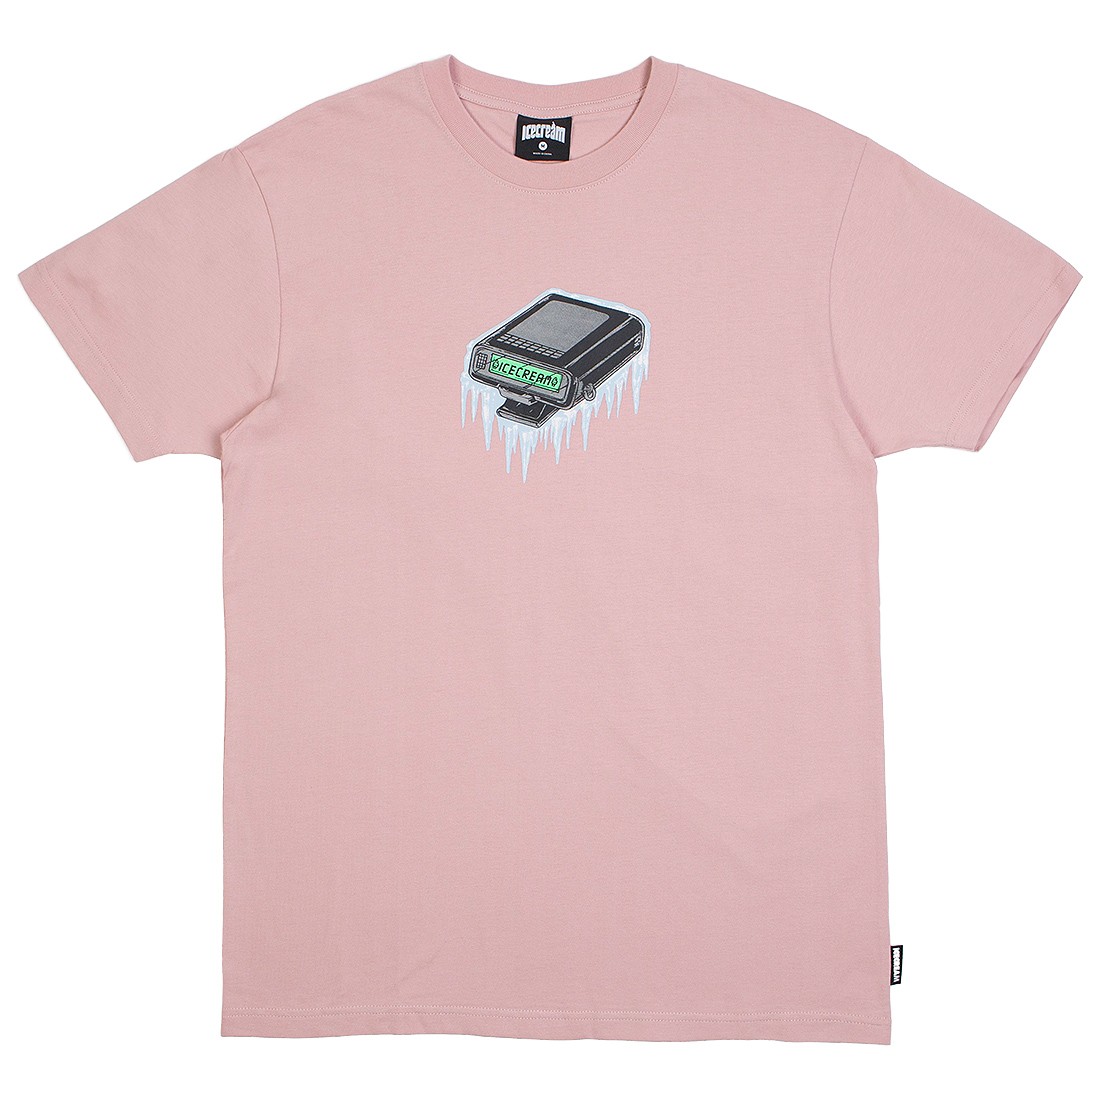 Ice Cream Men Pager Tee (pink / mauve)